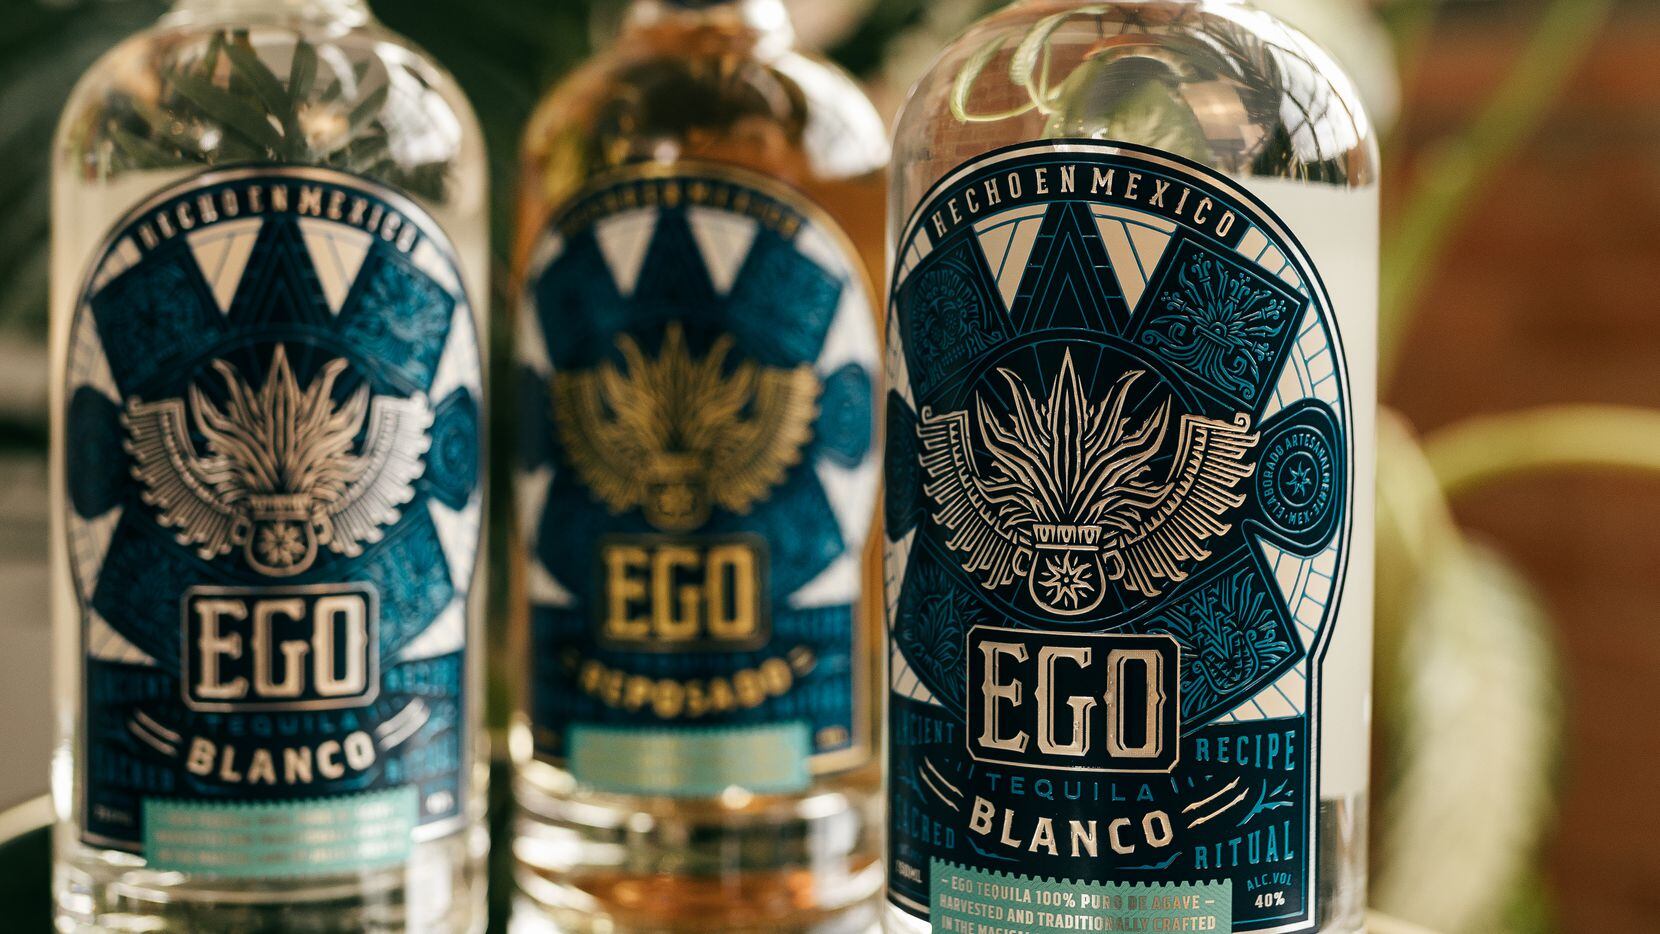 Rikki Kelly founded Ego Tequila in Dallas.